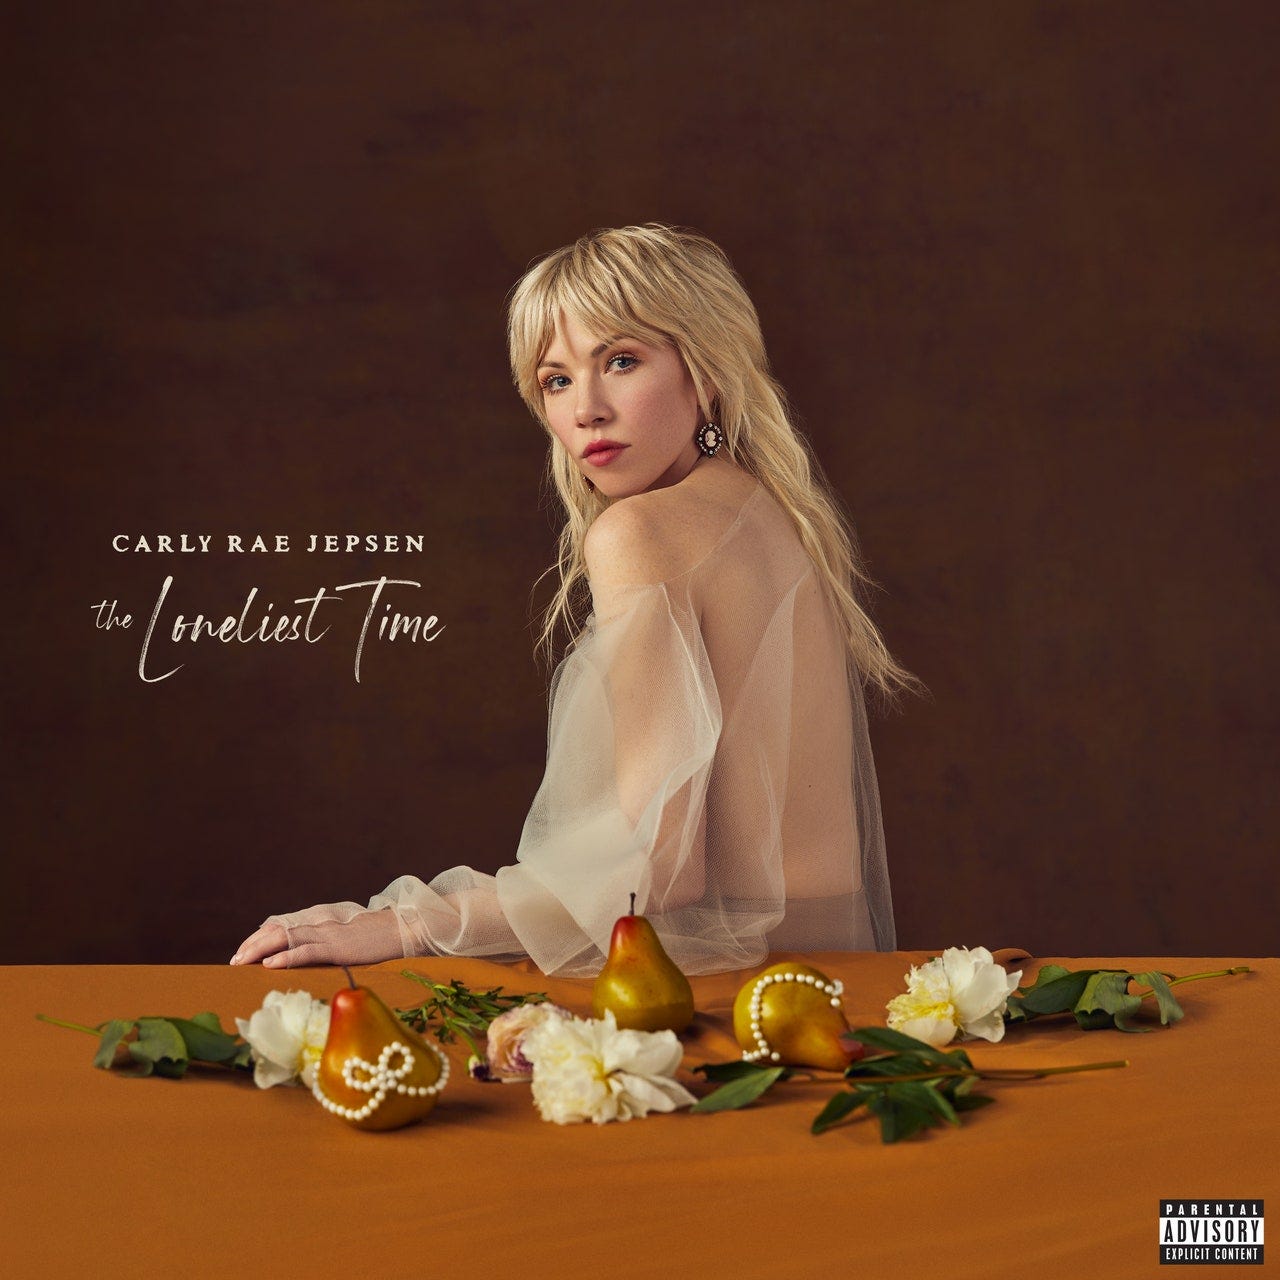 Carly Rae Jepsen: The Loneliest Time Album Review | Pitchfork